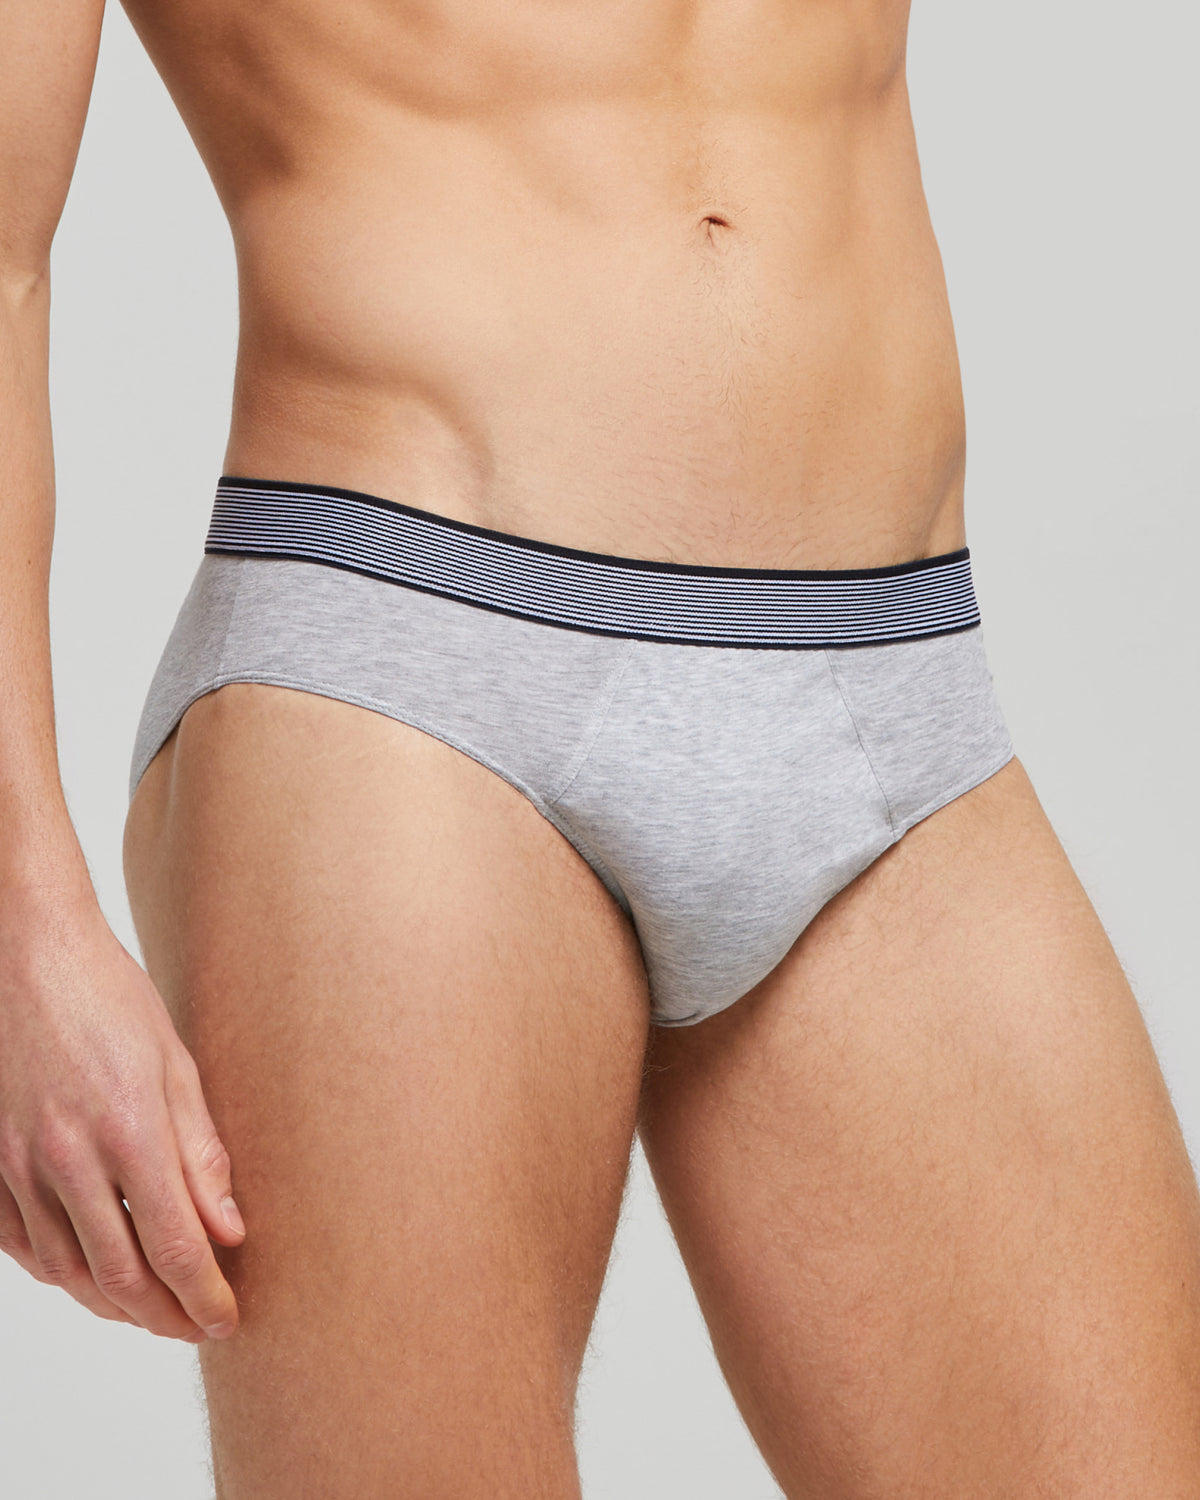 Cotton Planet men's organic cotton briefs with elasticated waistband